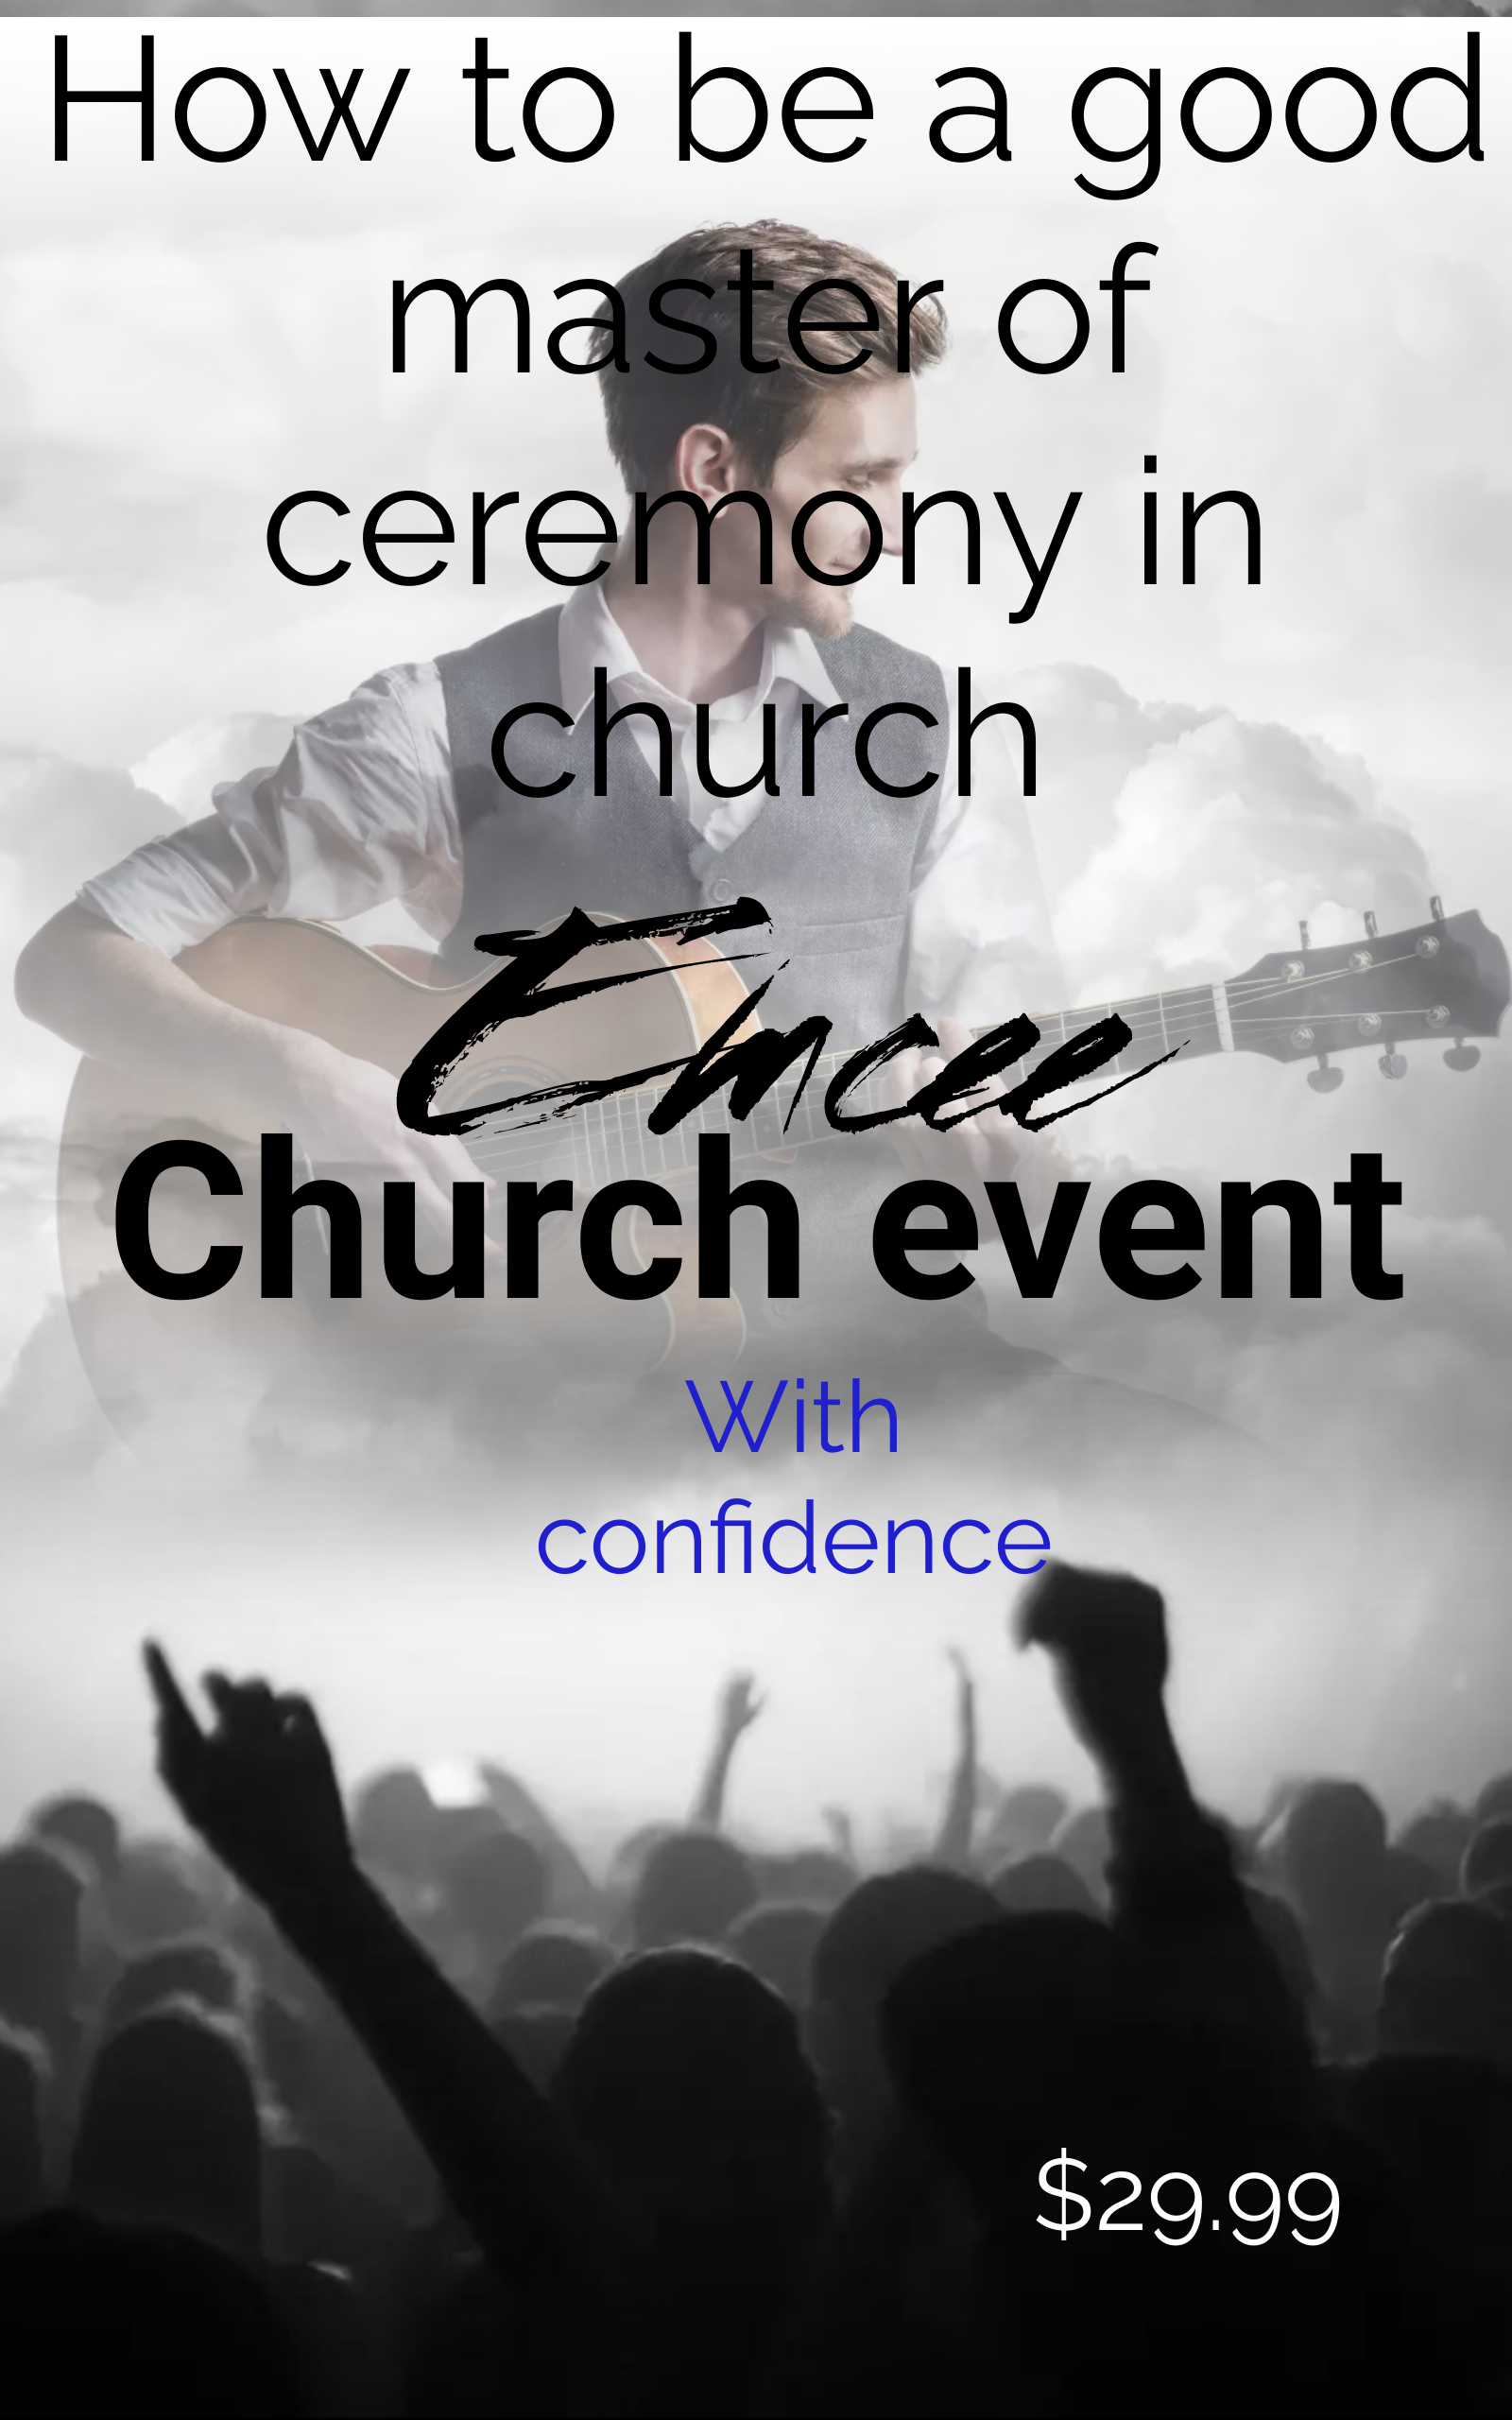 Here is how to be a good master of ceremony in church event and a church mc script that you can use